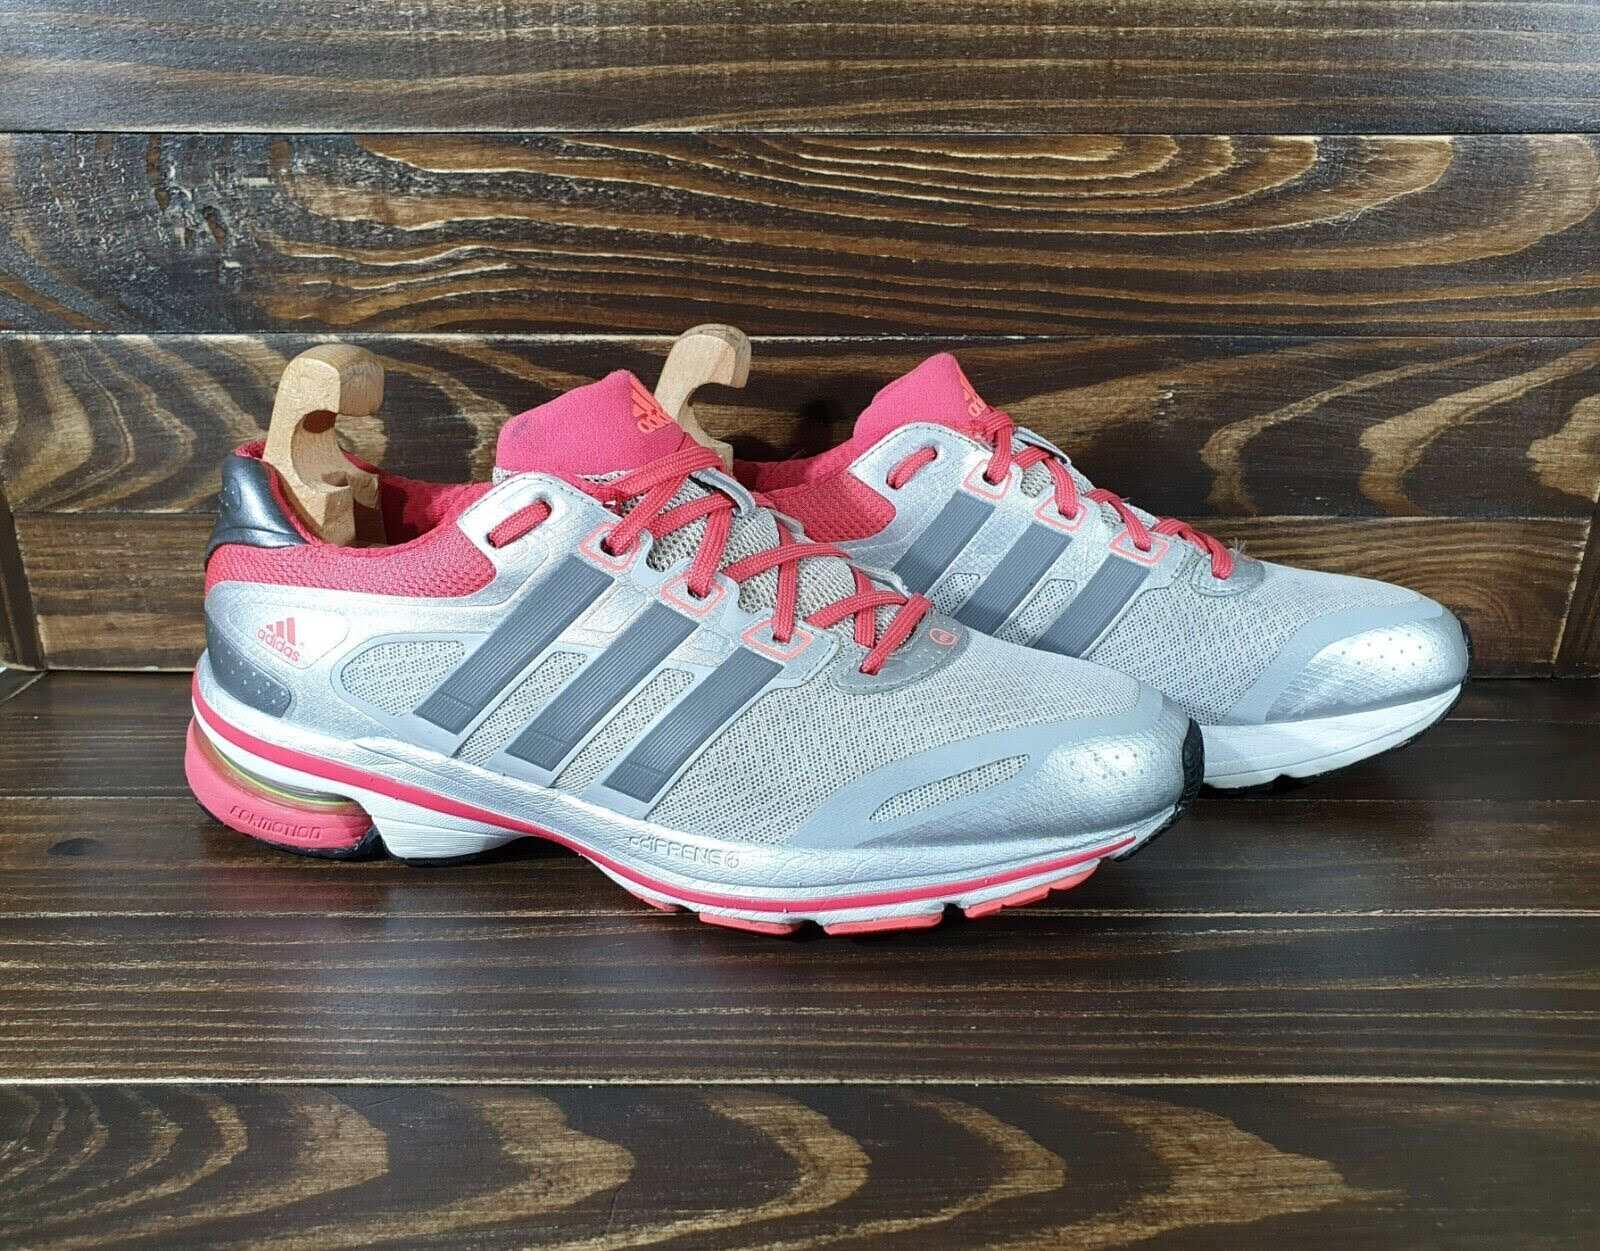 Review: Adidas Supernova Glide 5 – The Ultimate Running Shoe